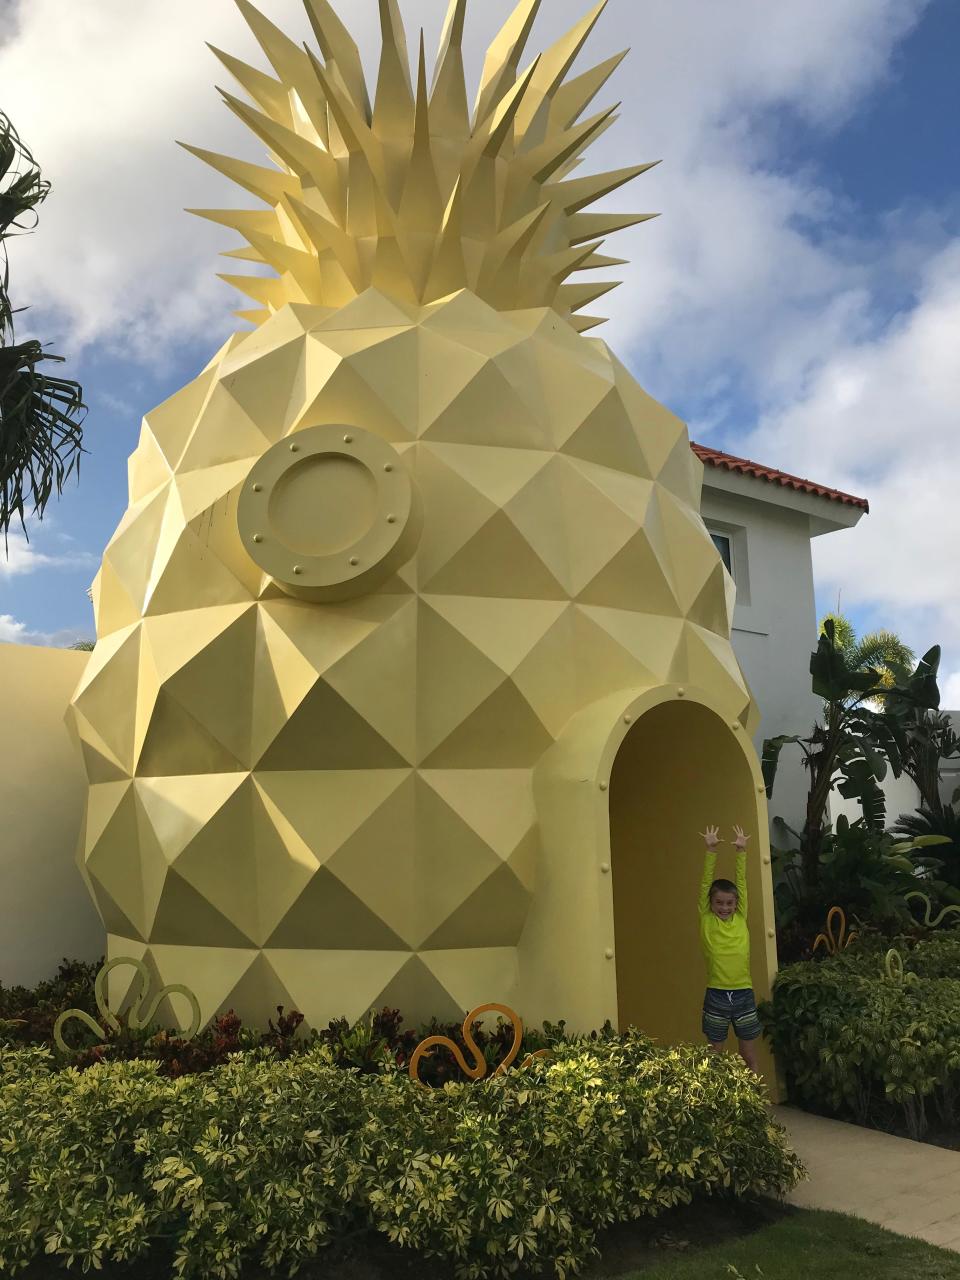 A boy stands outside the Pineapple Villa at The Nickelodeon Hotel